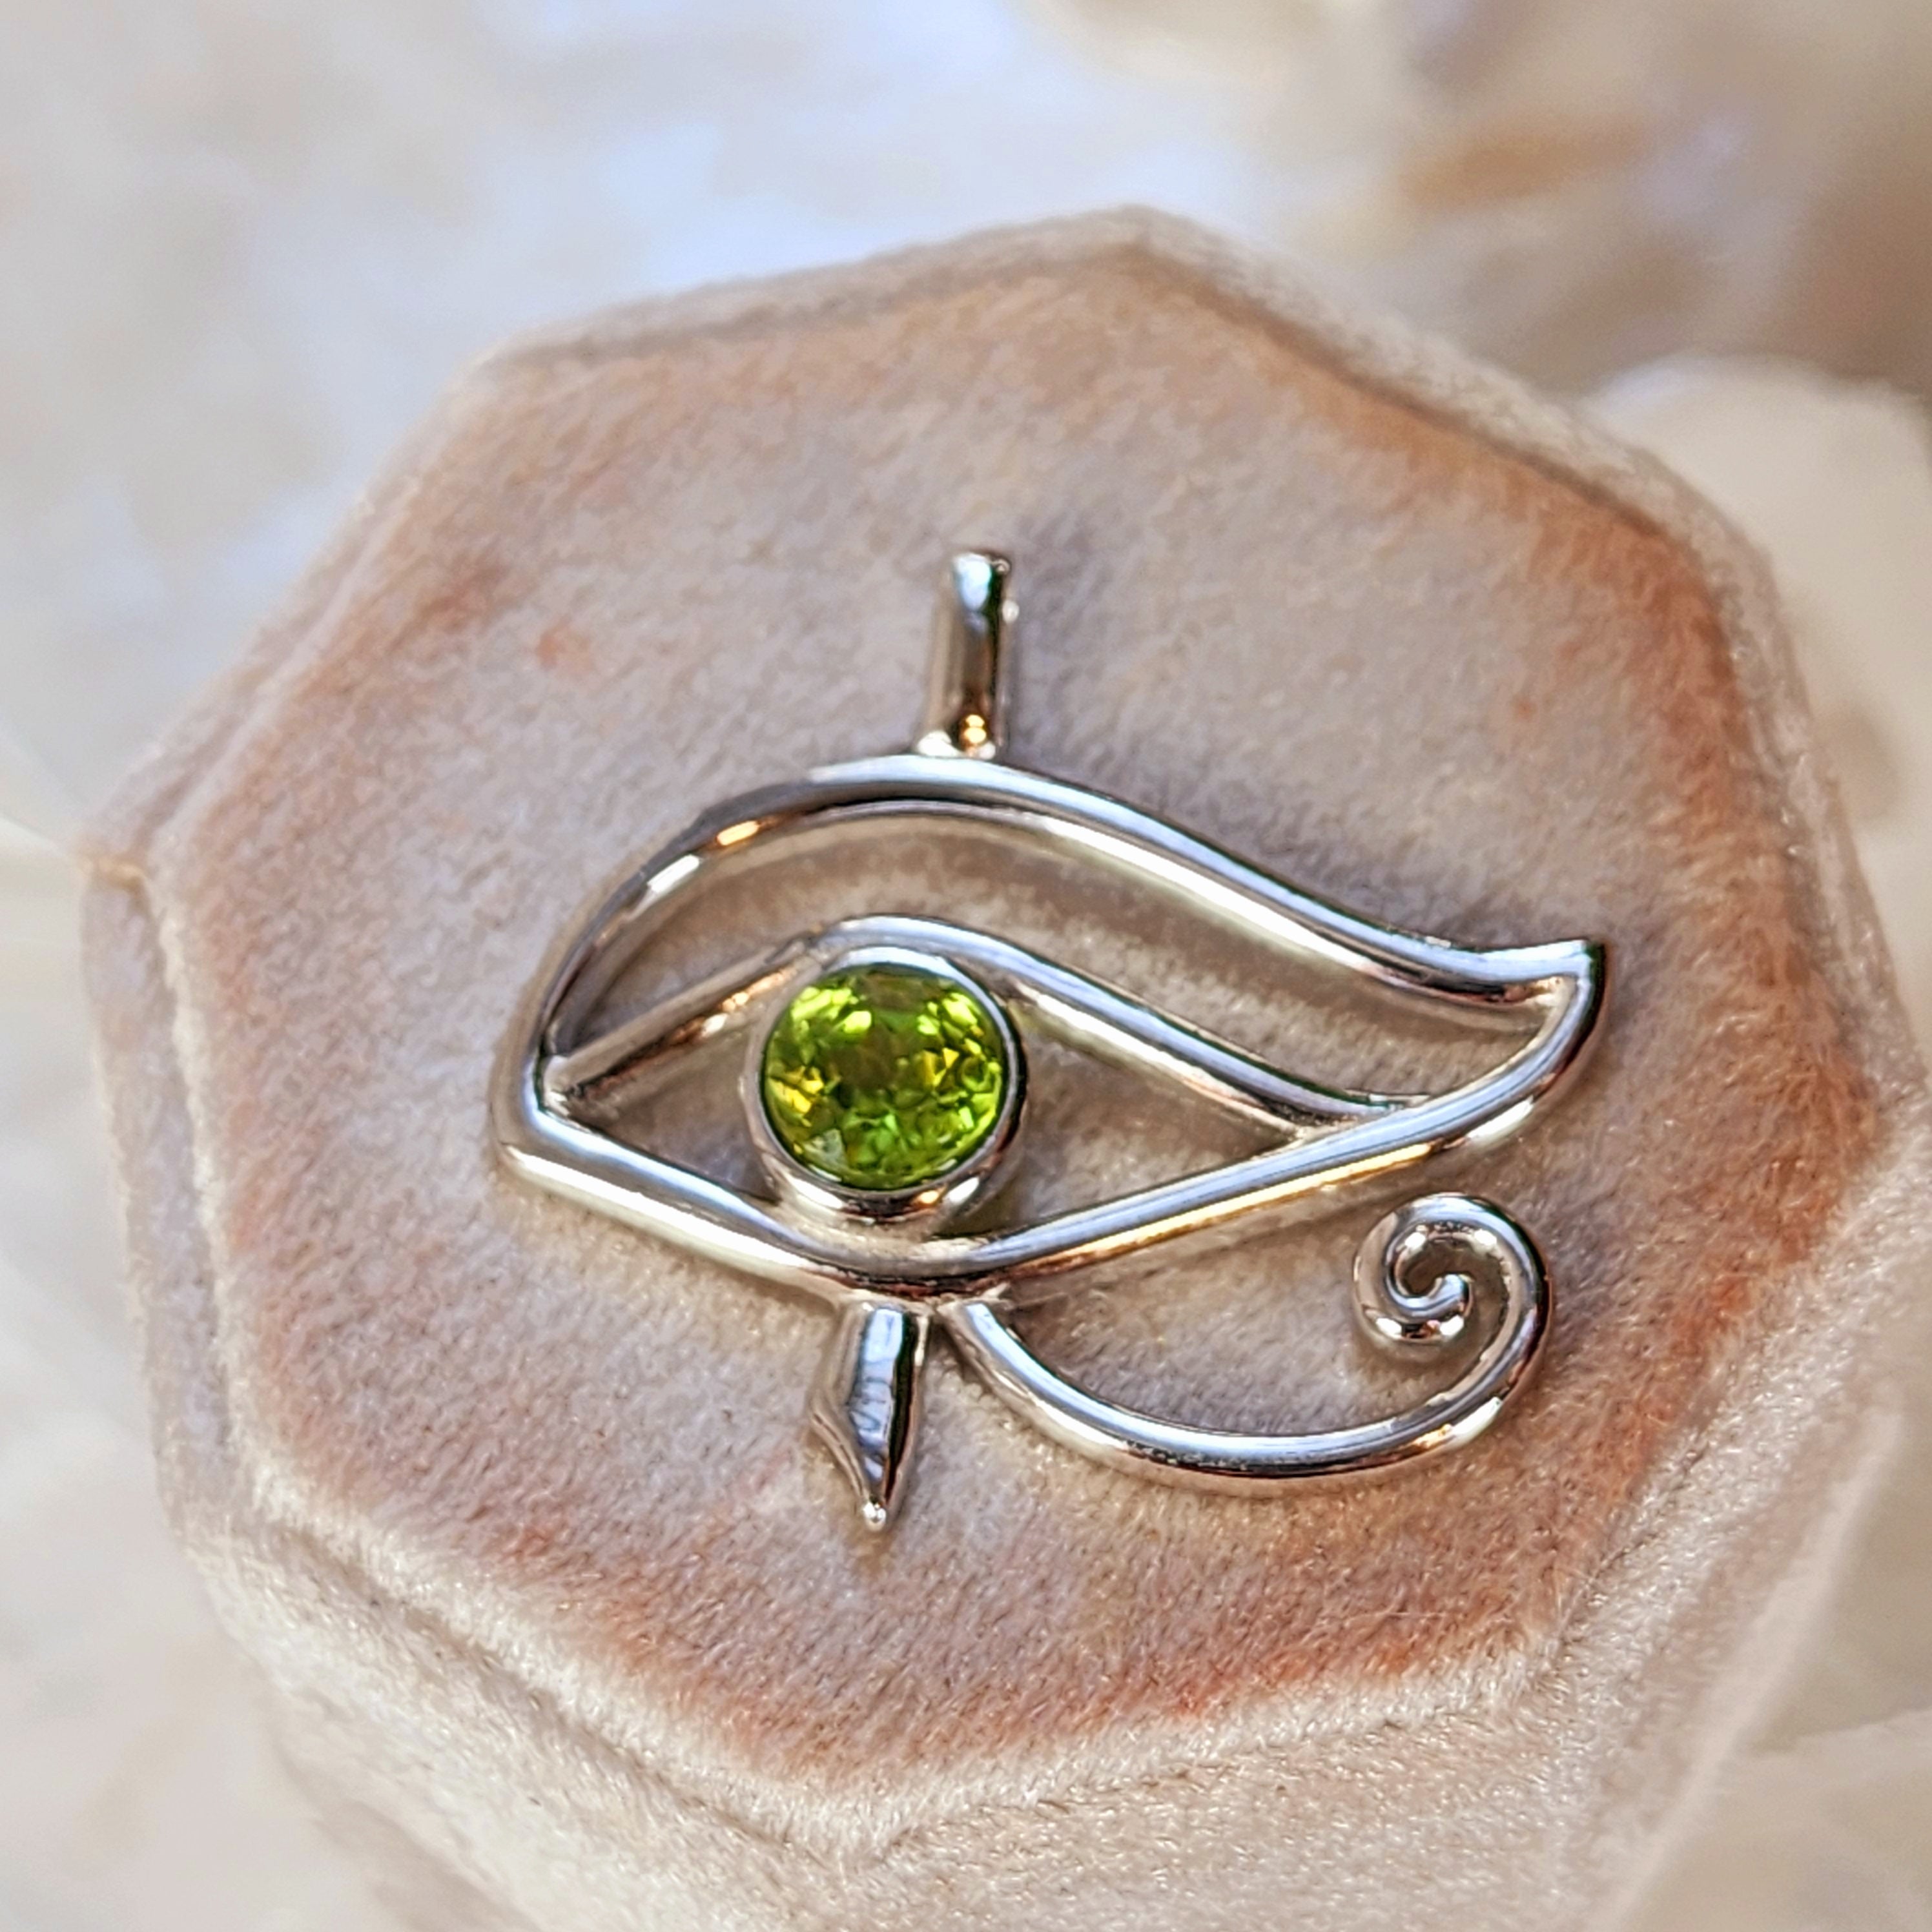 Peridot Eye of Horus Amulet Pendant .925 Silver for Good Luck, Prosperity & Protection